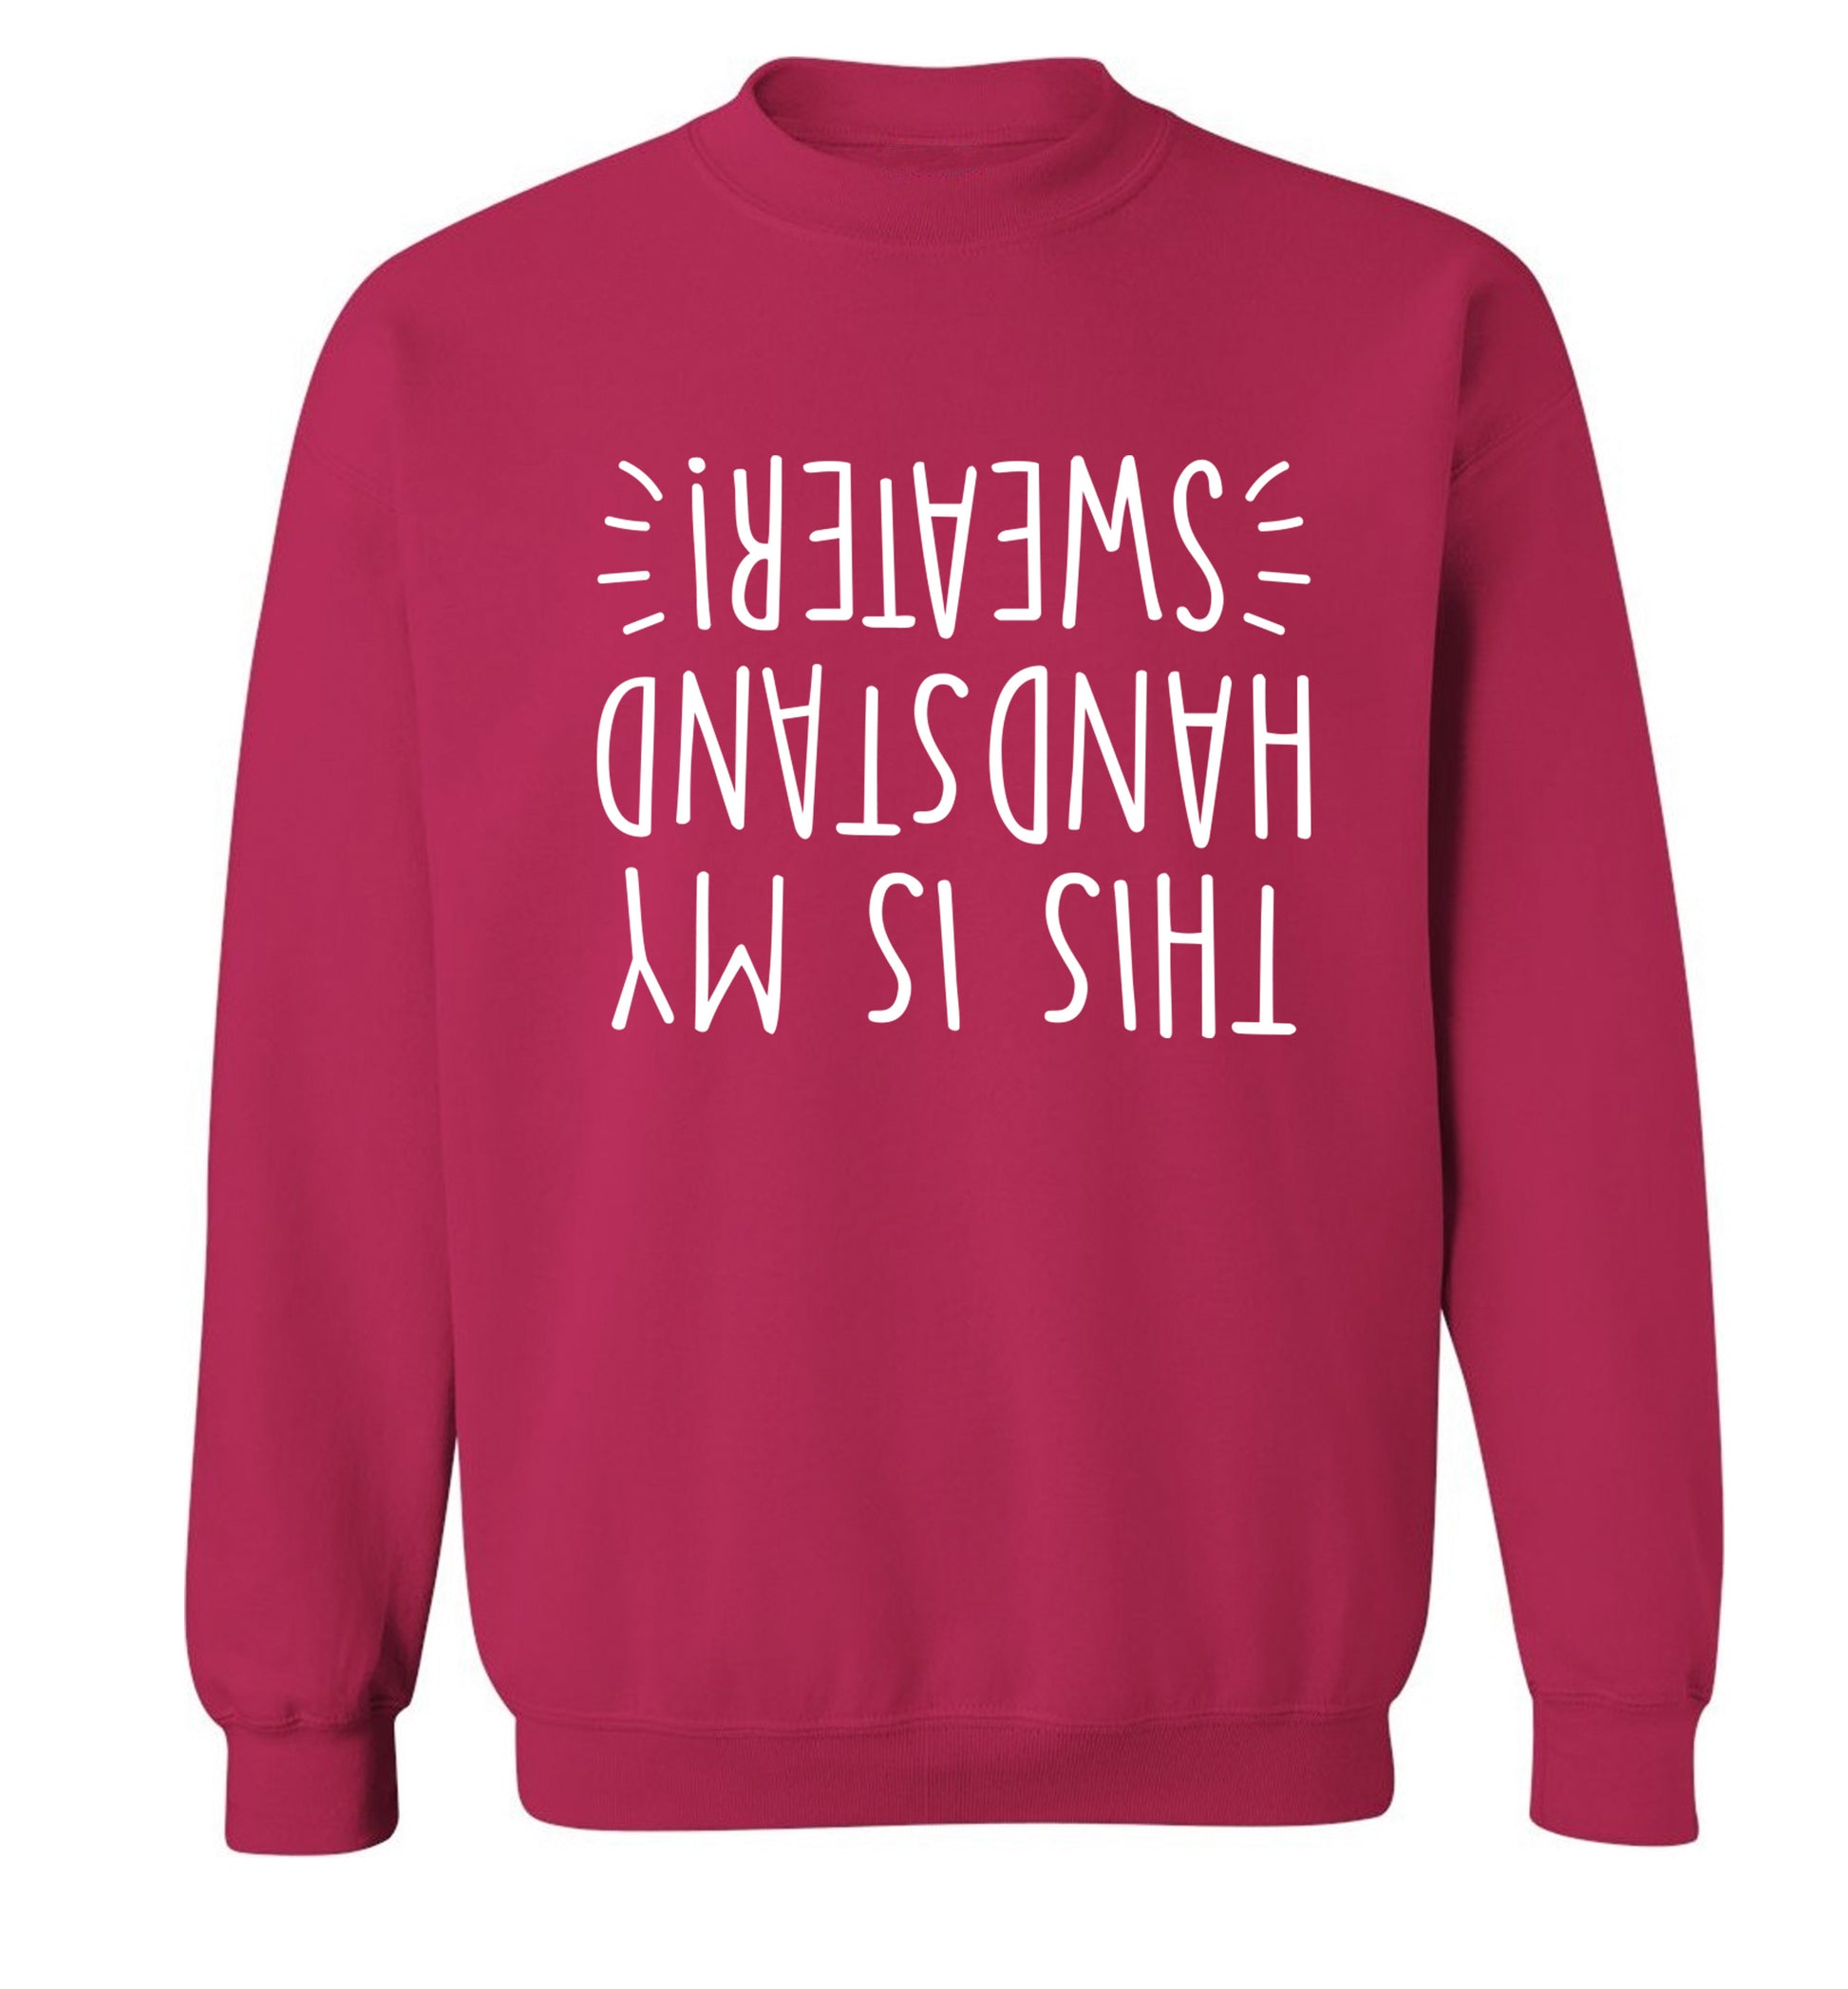 This is my handstand Adult's unisex pink Sweater 2XL